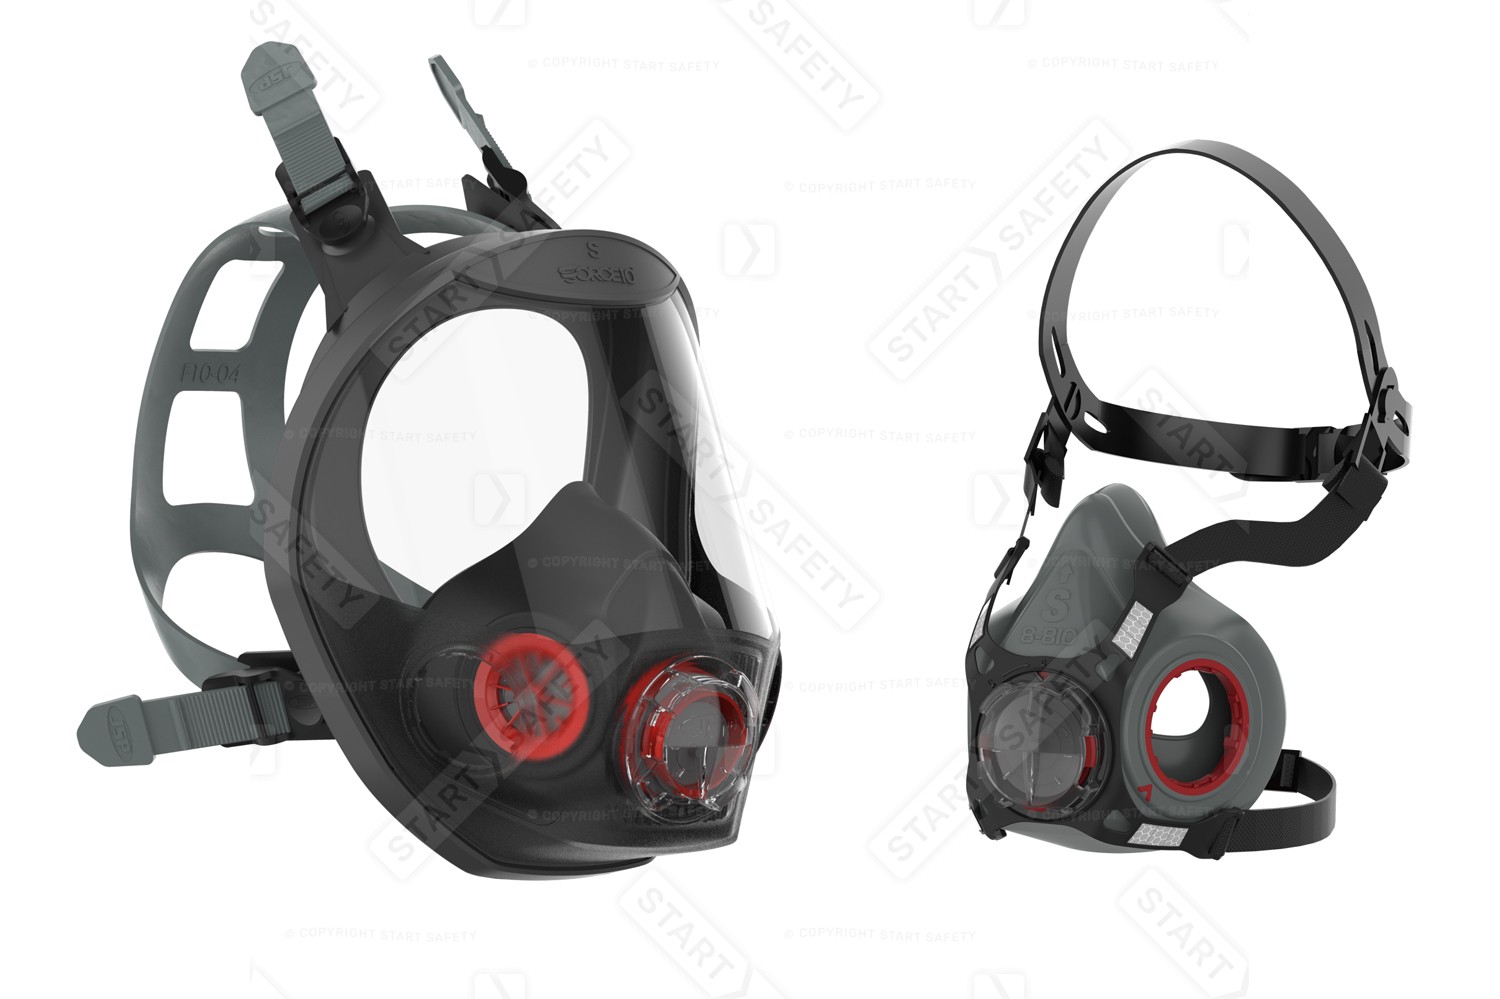 Force10 and Force8 Masks